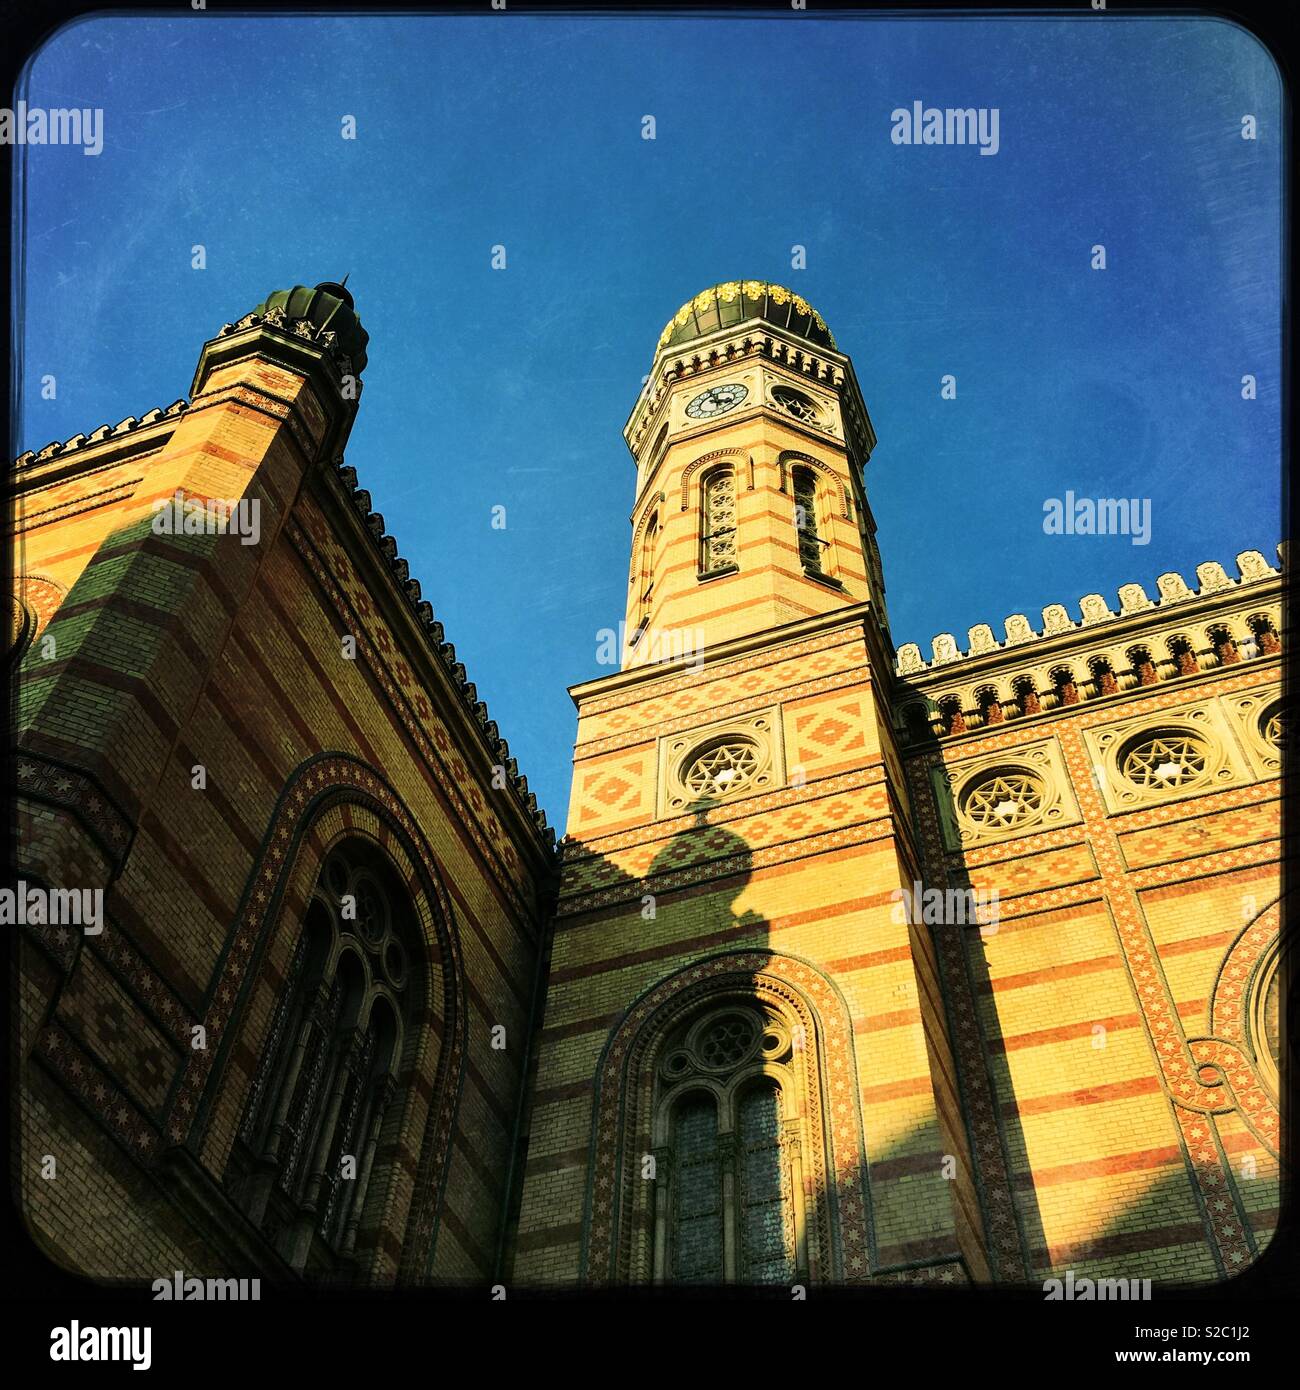 One of the towers of the Dohány Street Synagogue, Budapest, Hungary. Also known as the Great or Tabakgasse Synagogue. Stock Photo